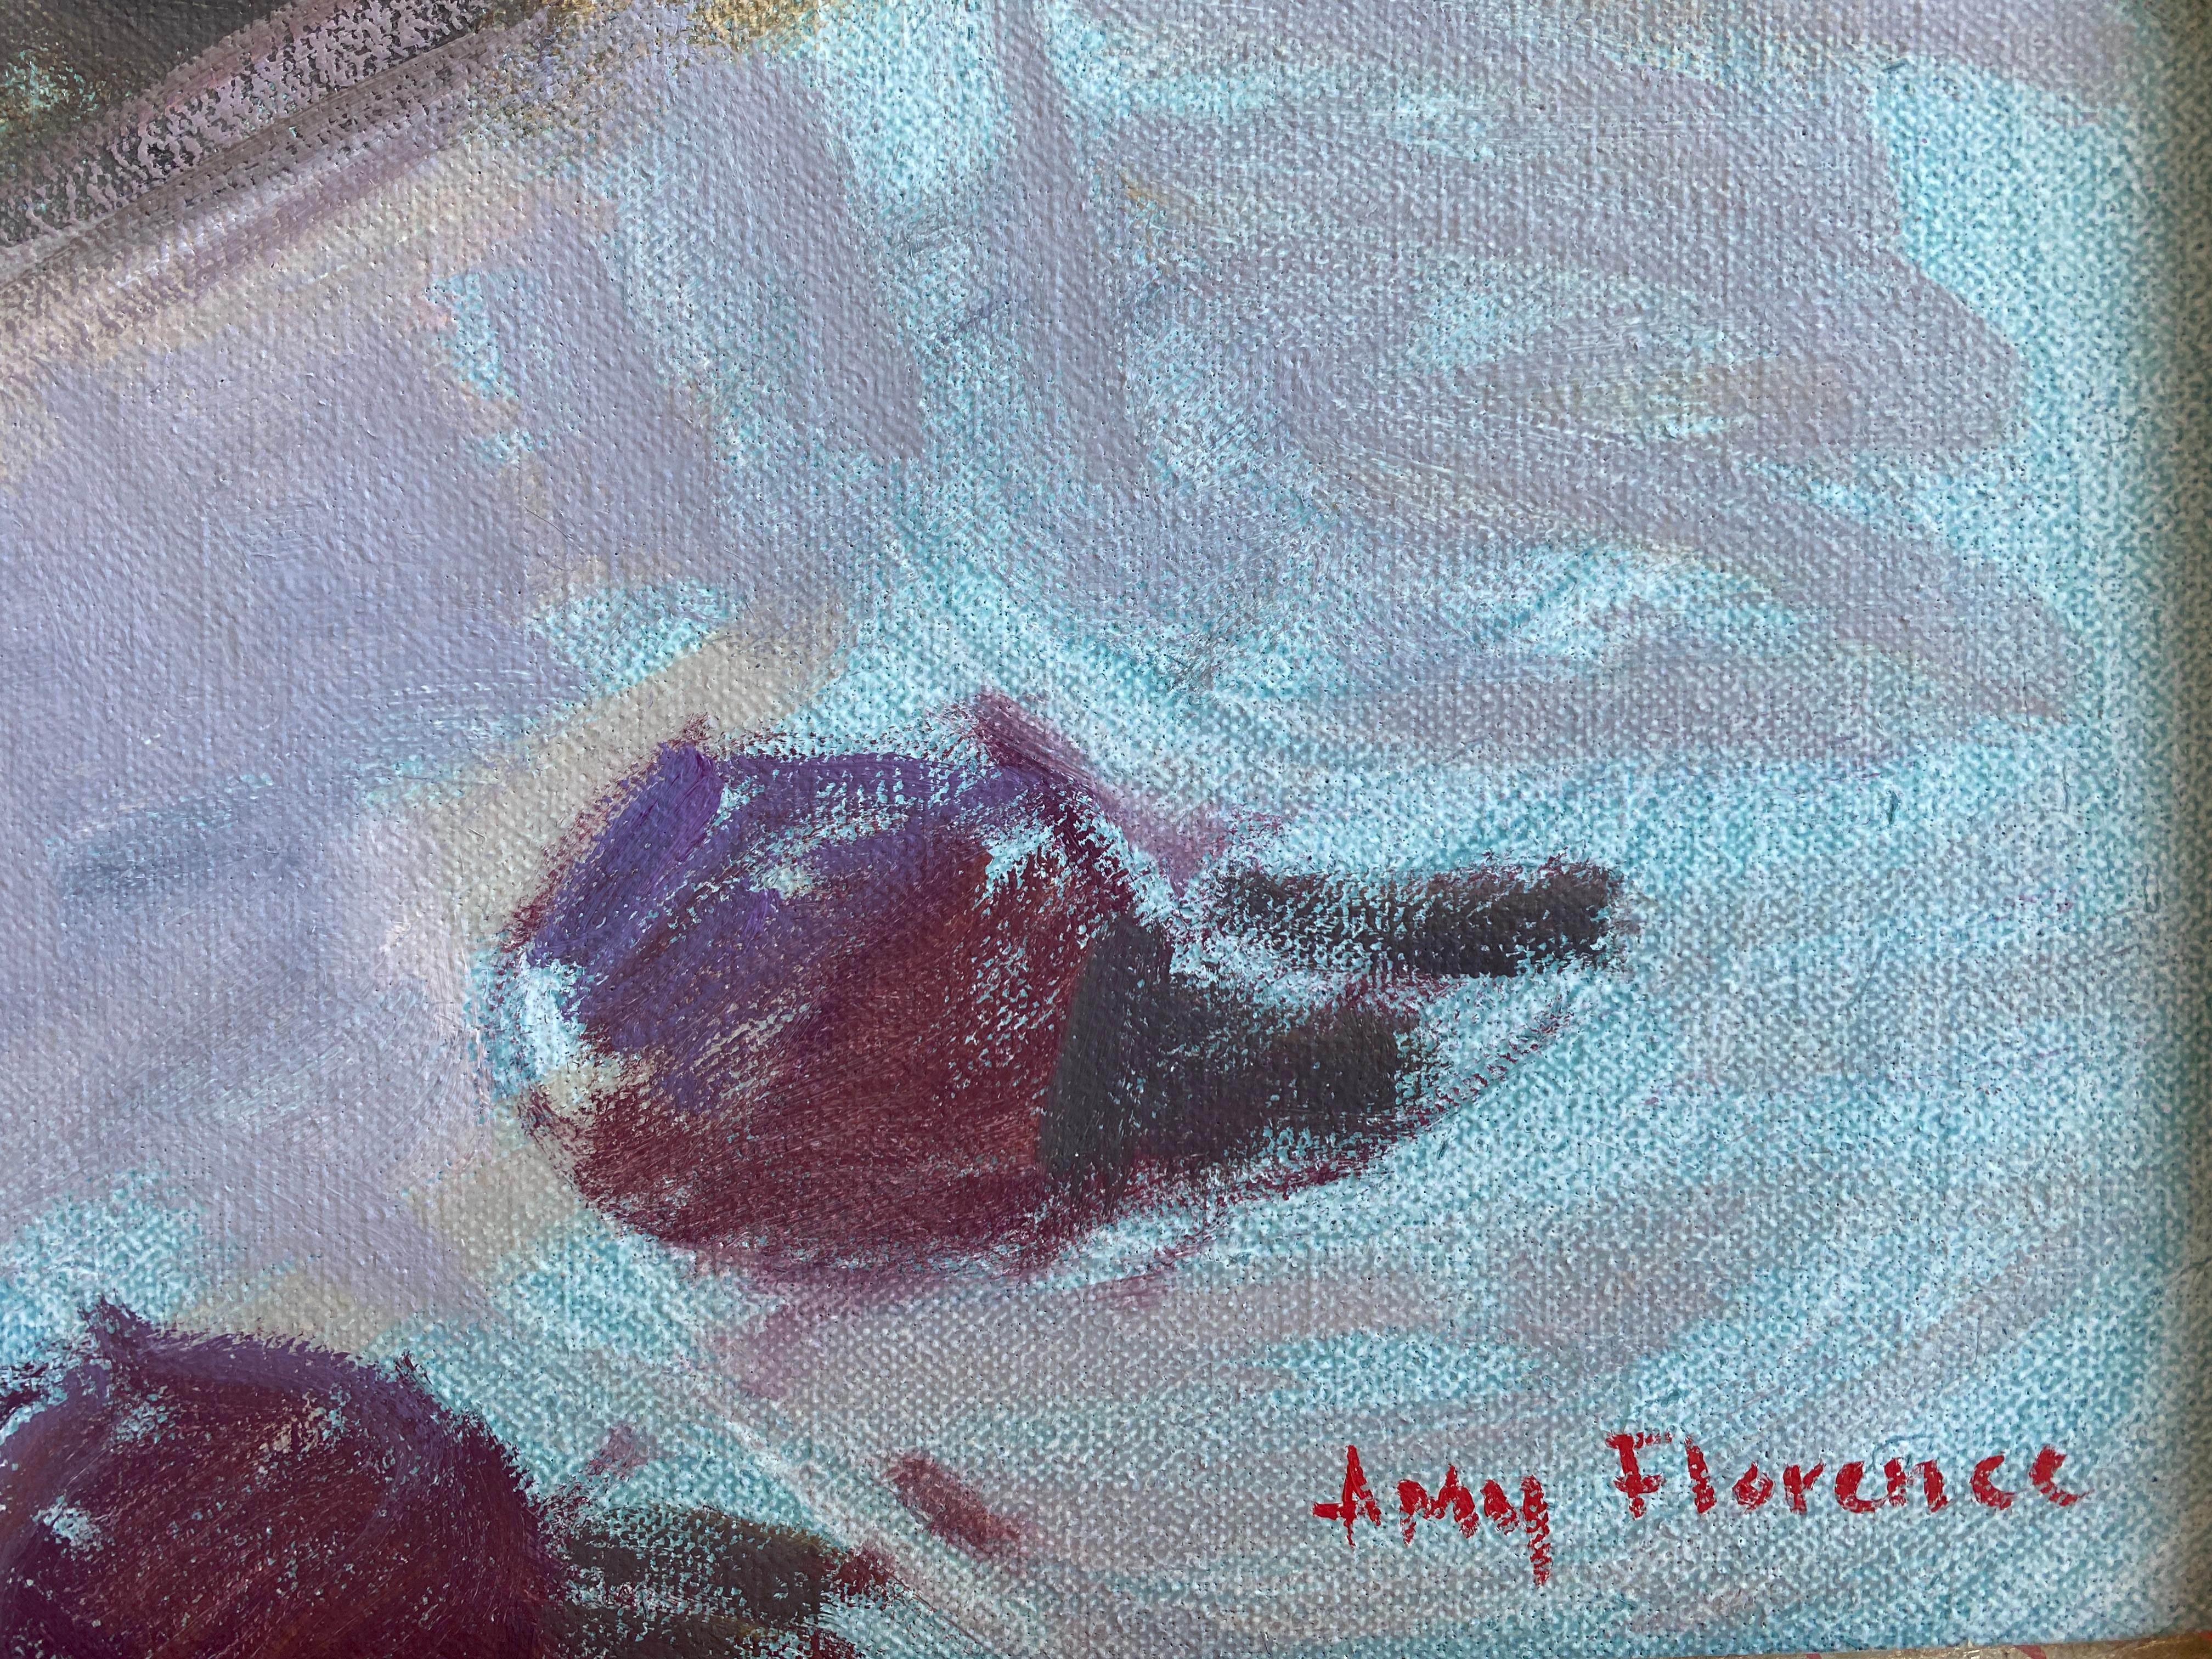 Roses and Plums - Impressionist Painting by Amy Florence